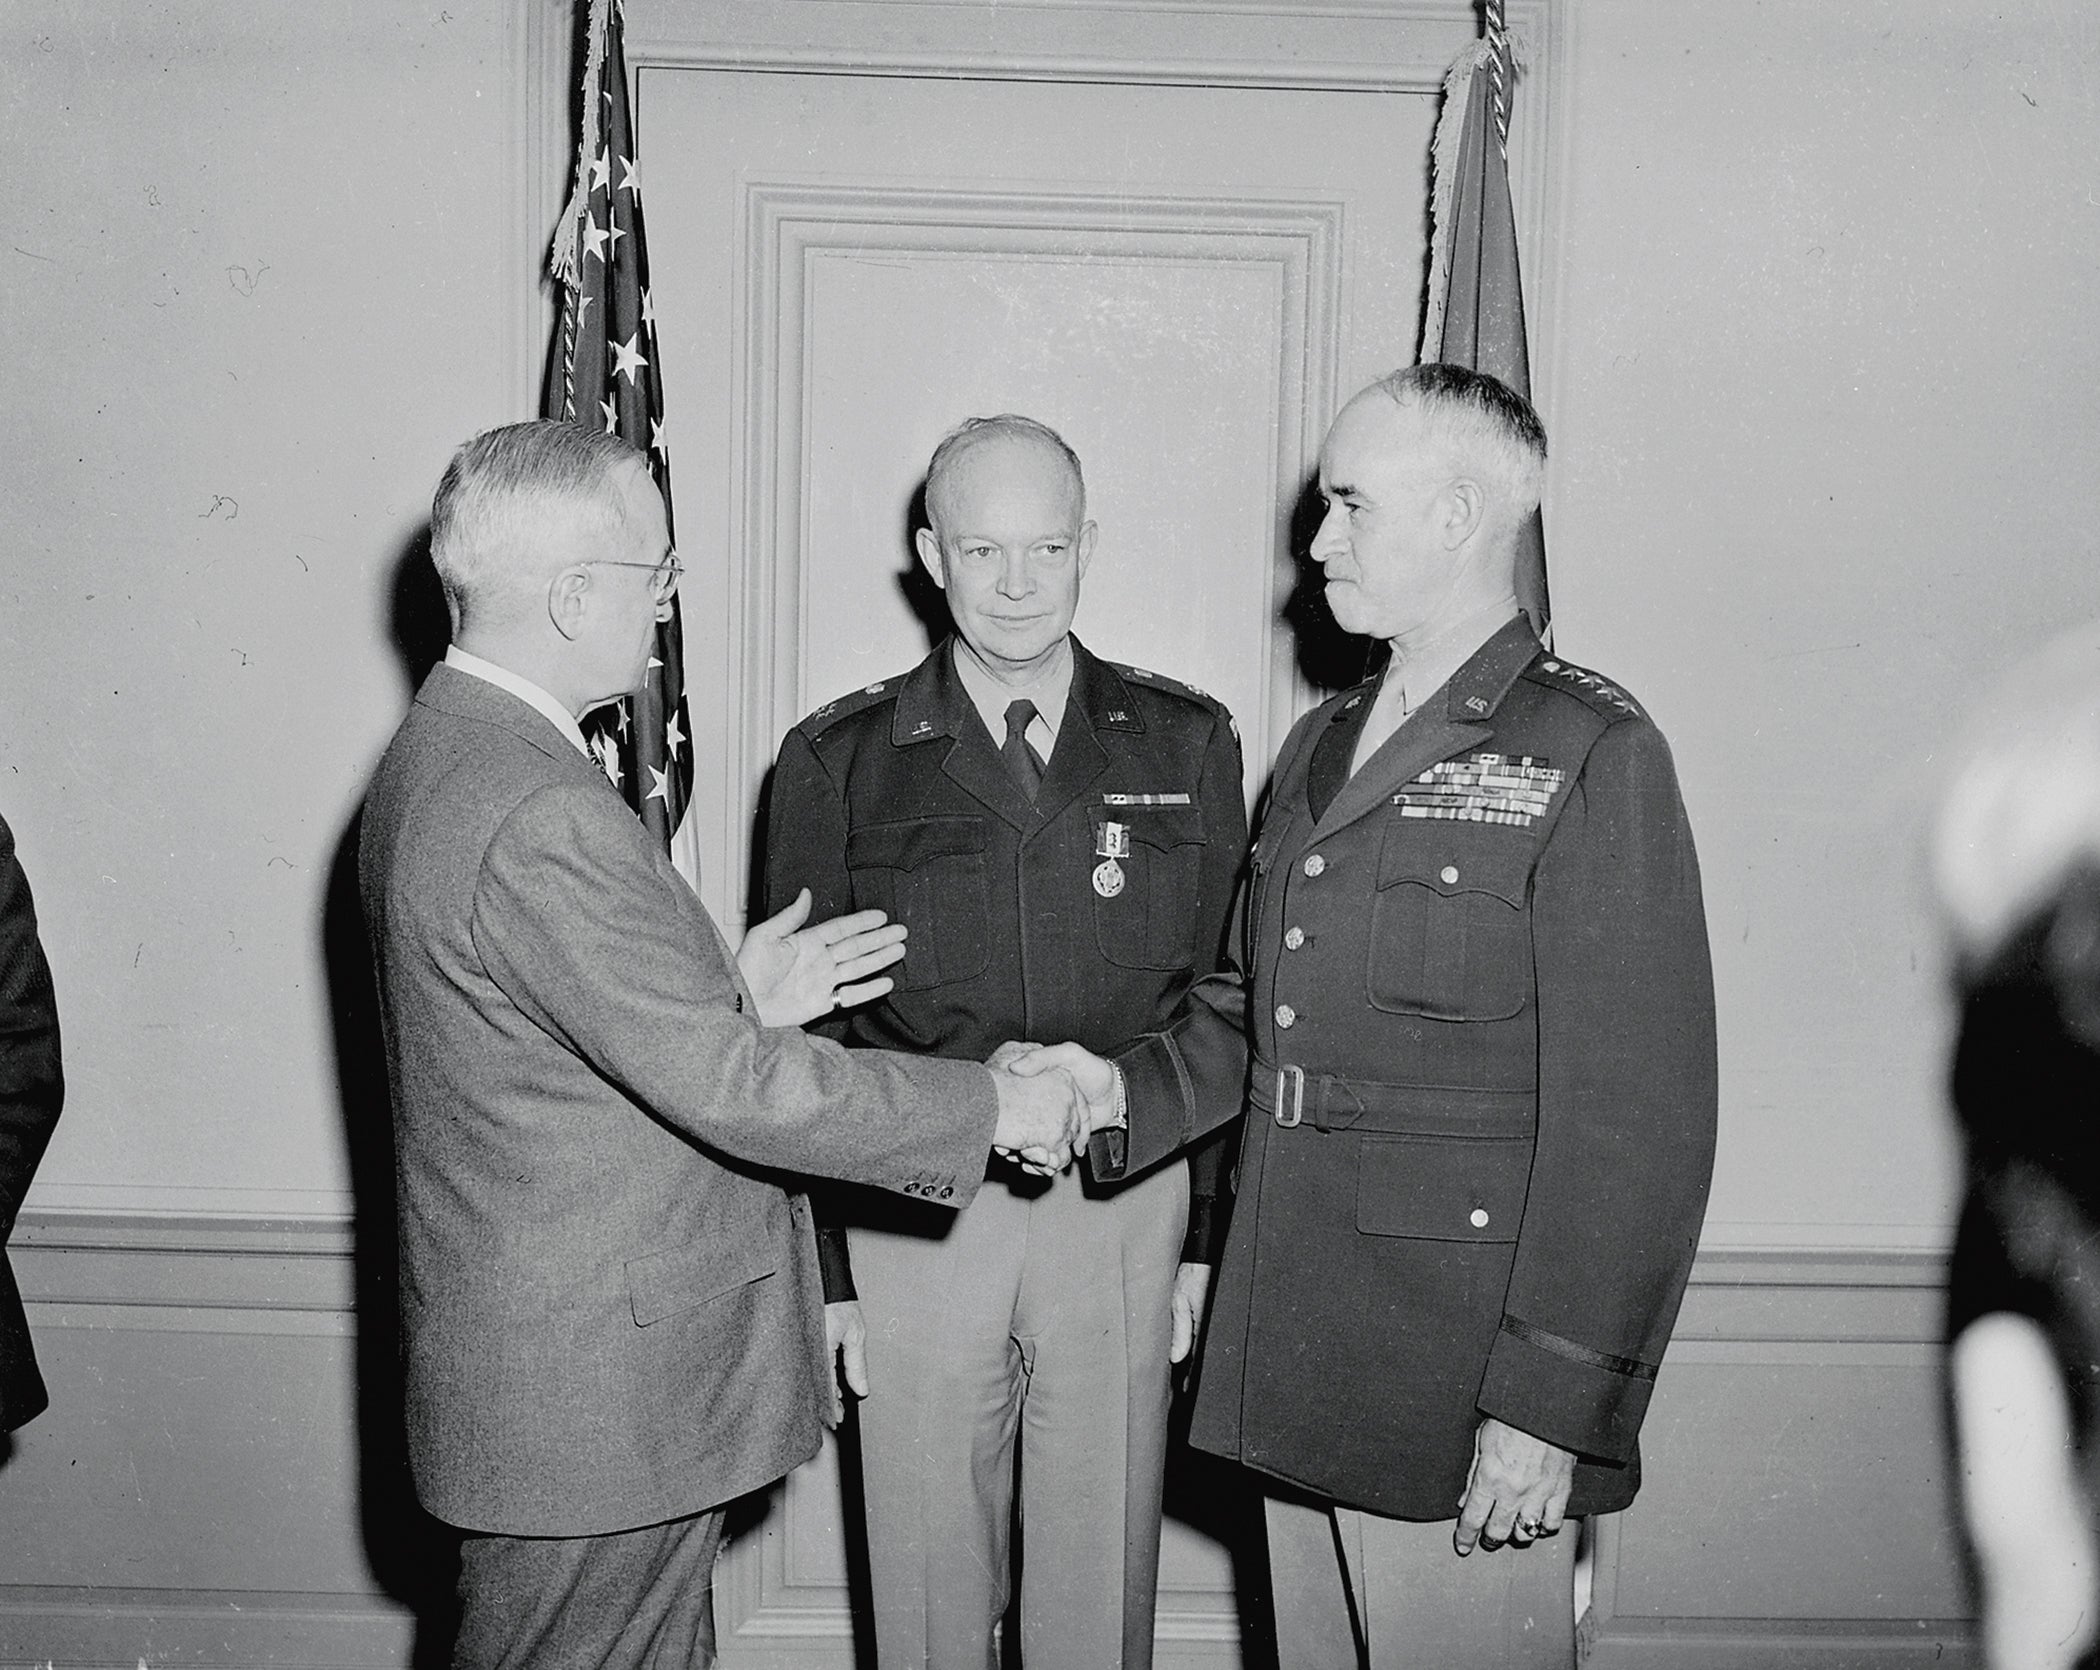 President Harry Truman, left, shakes hands with Gen. Omar Bradley, who has just been sworn in as Army chief of staff, as Gen. Dwight Eisenhower looks on. (Credit: Wikimedia Commons)